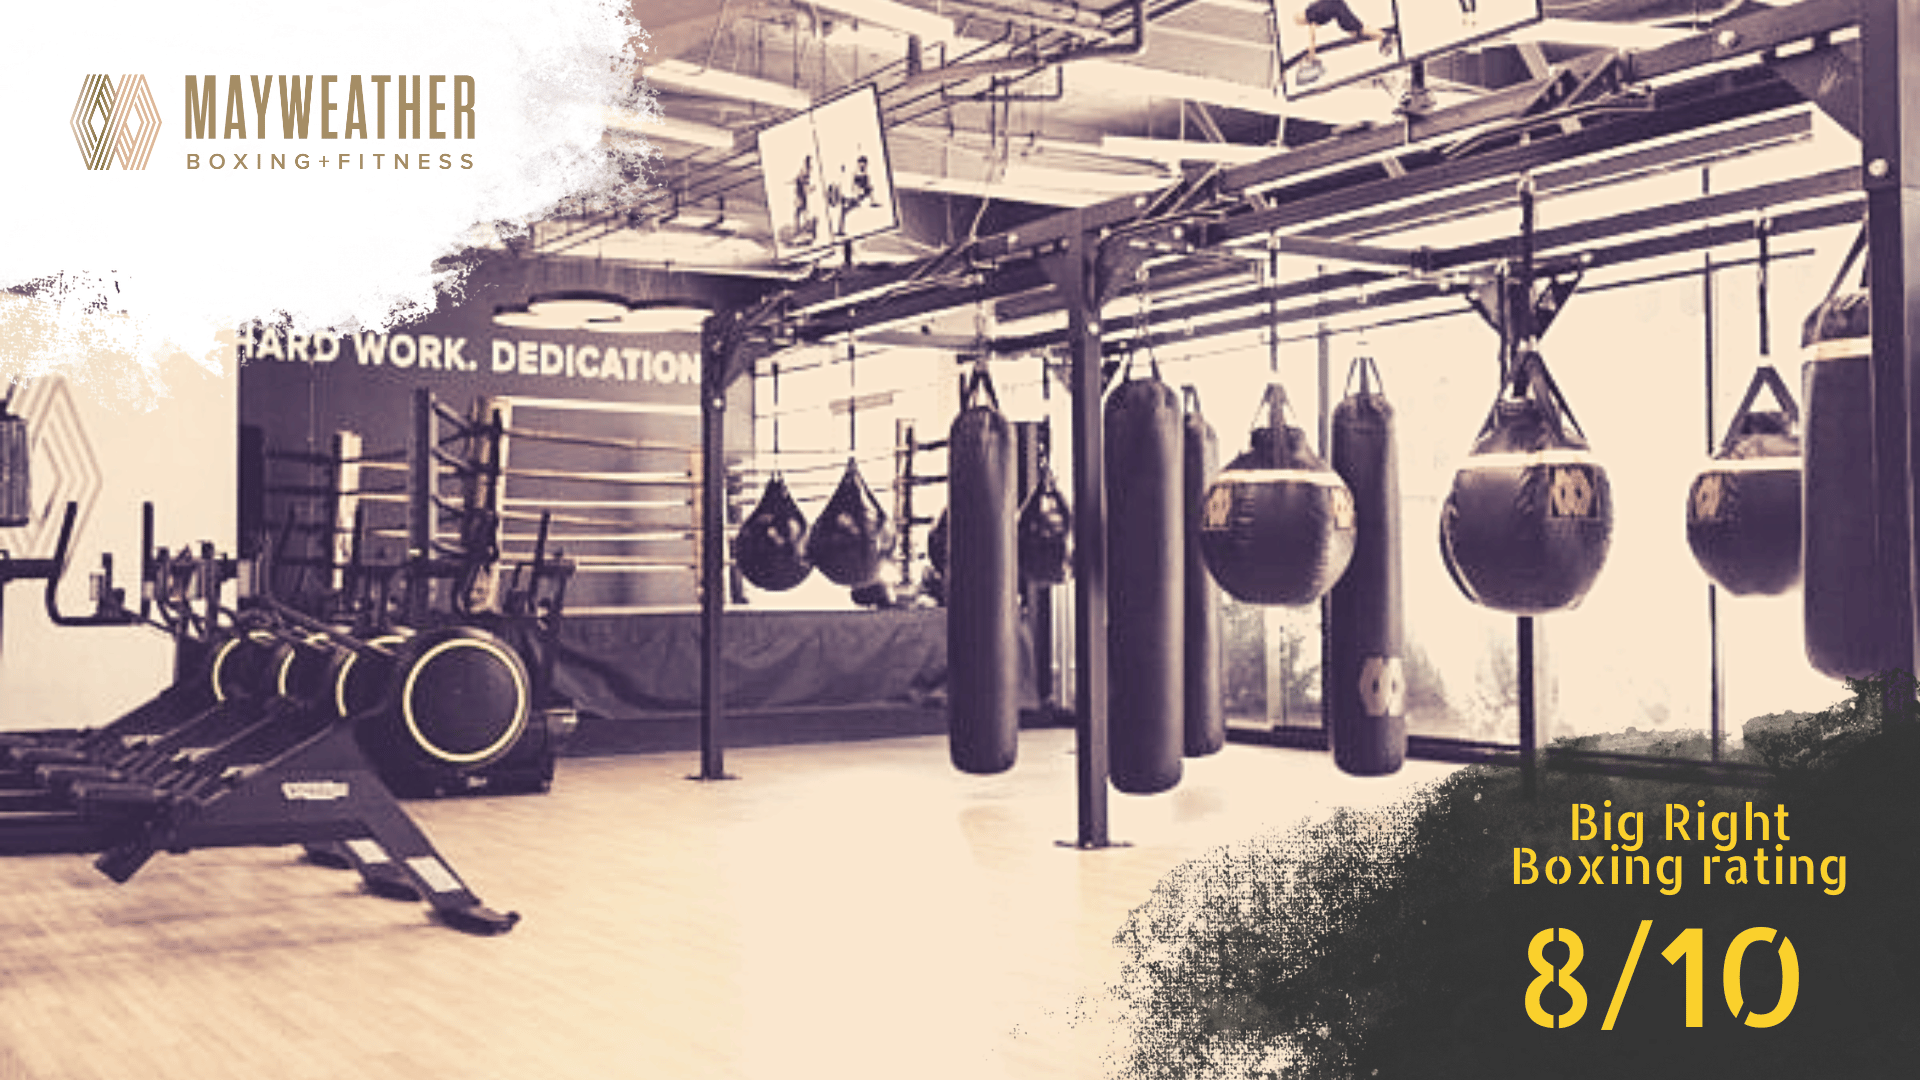 Mayweather Boxing + Fitness classes in New Orleans